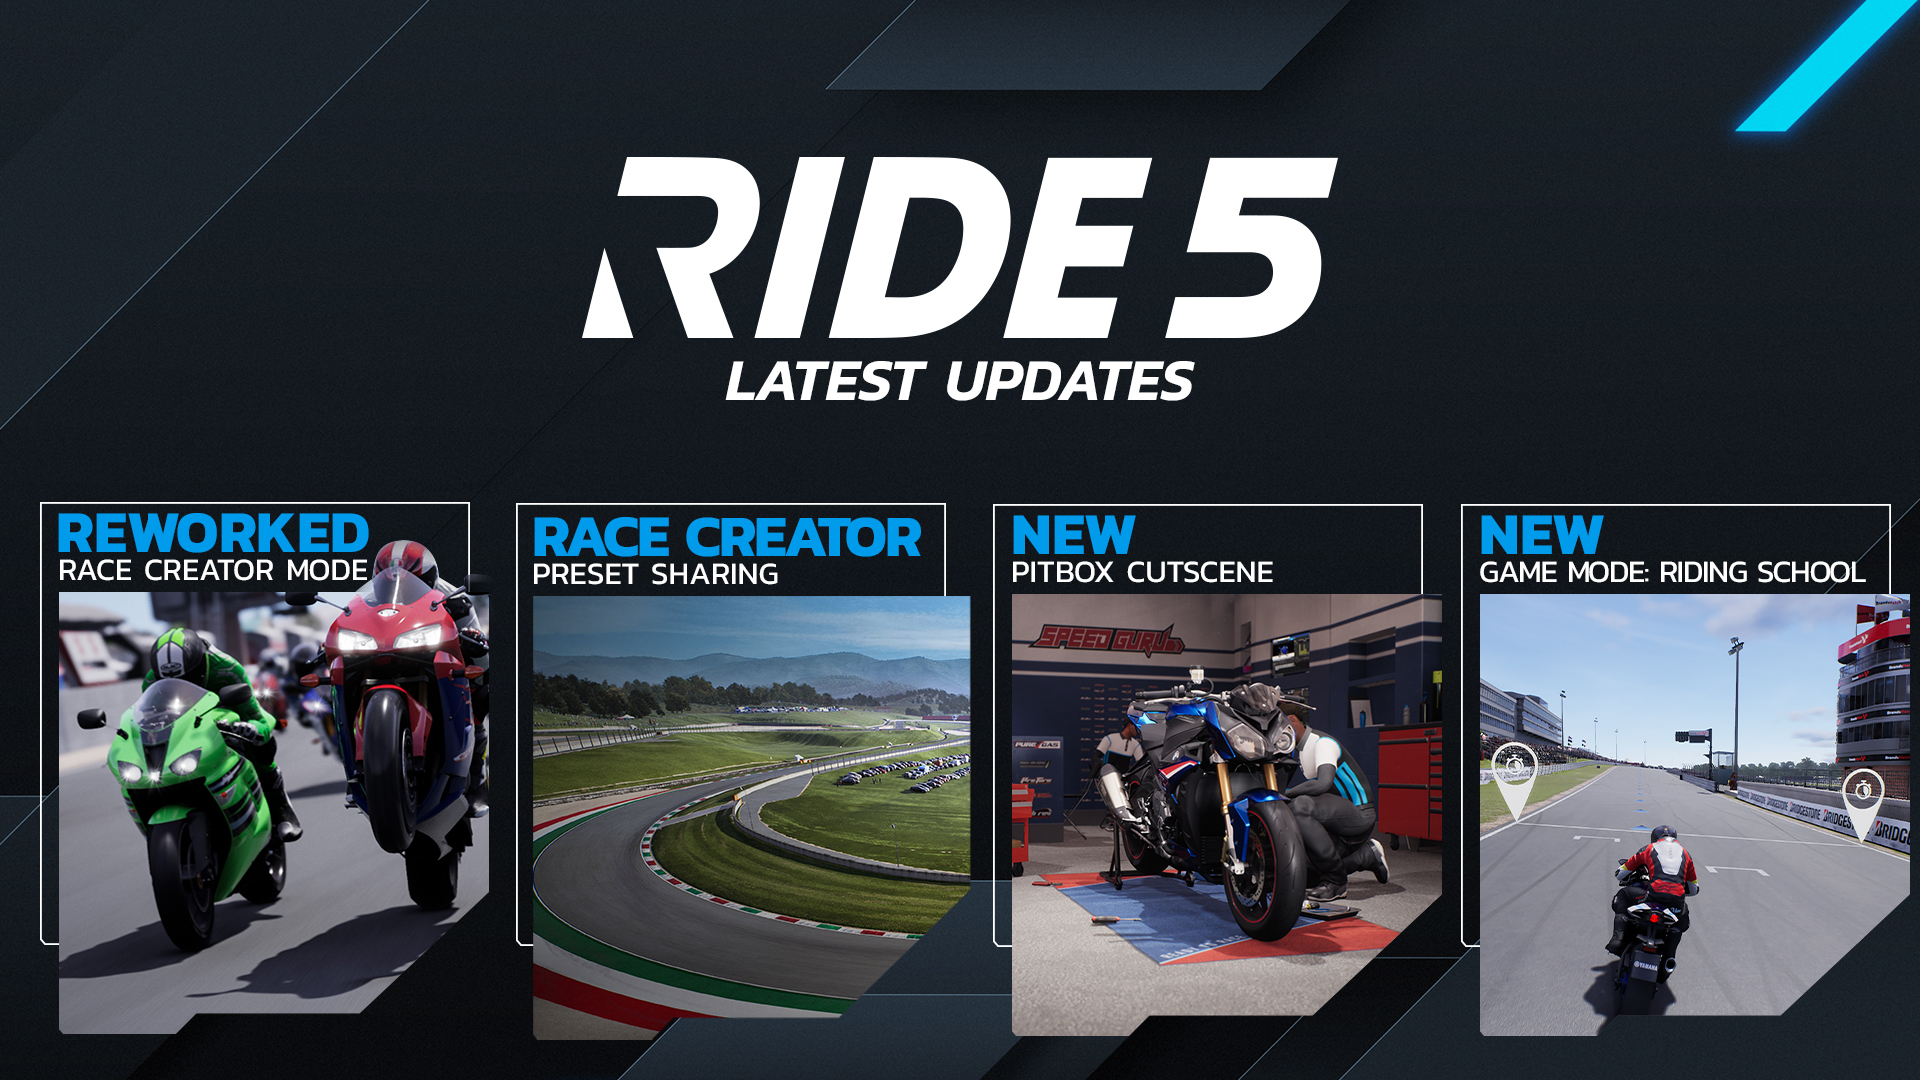 New Patch Released - RIDE 5